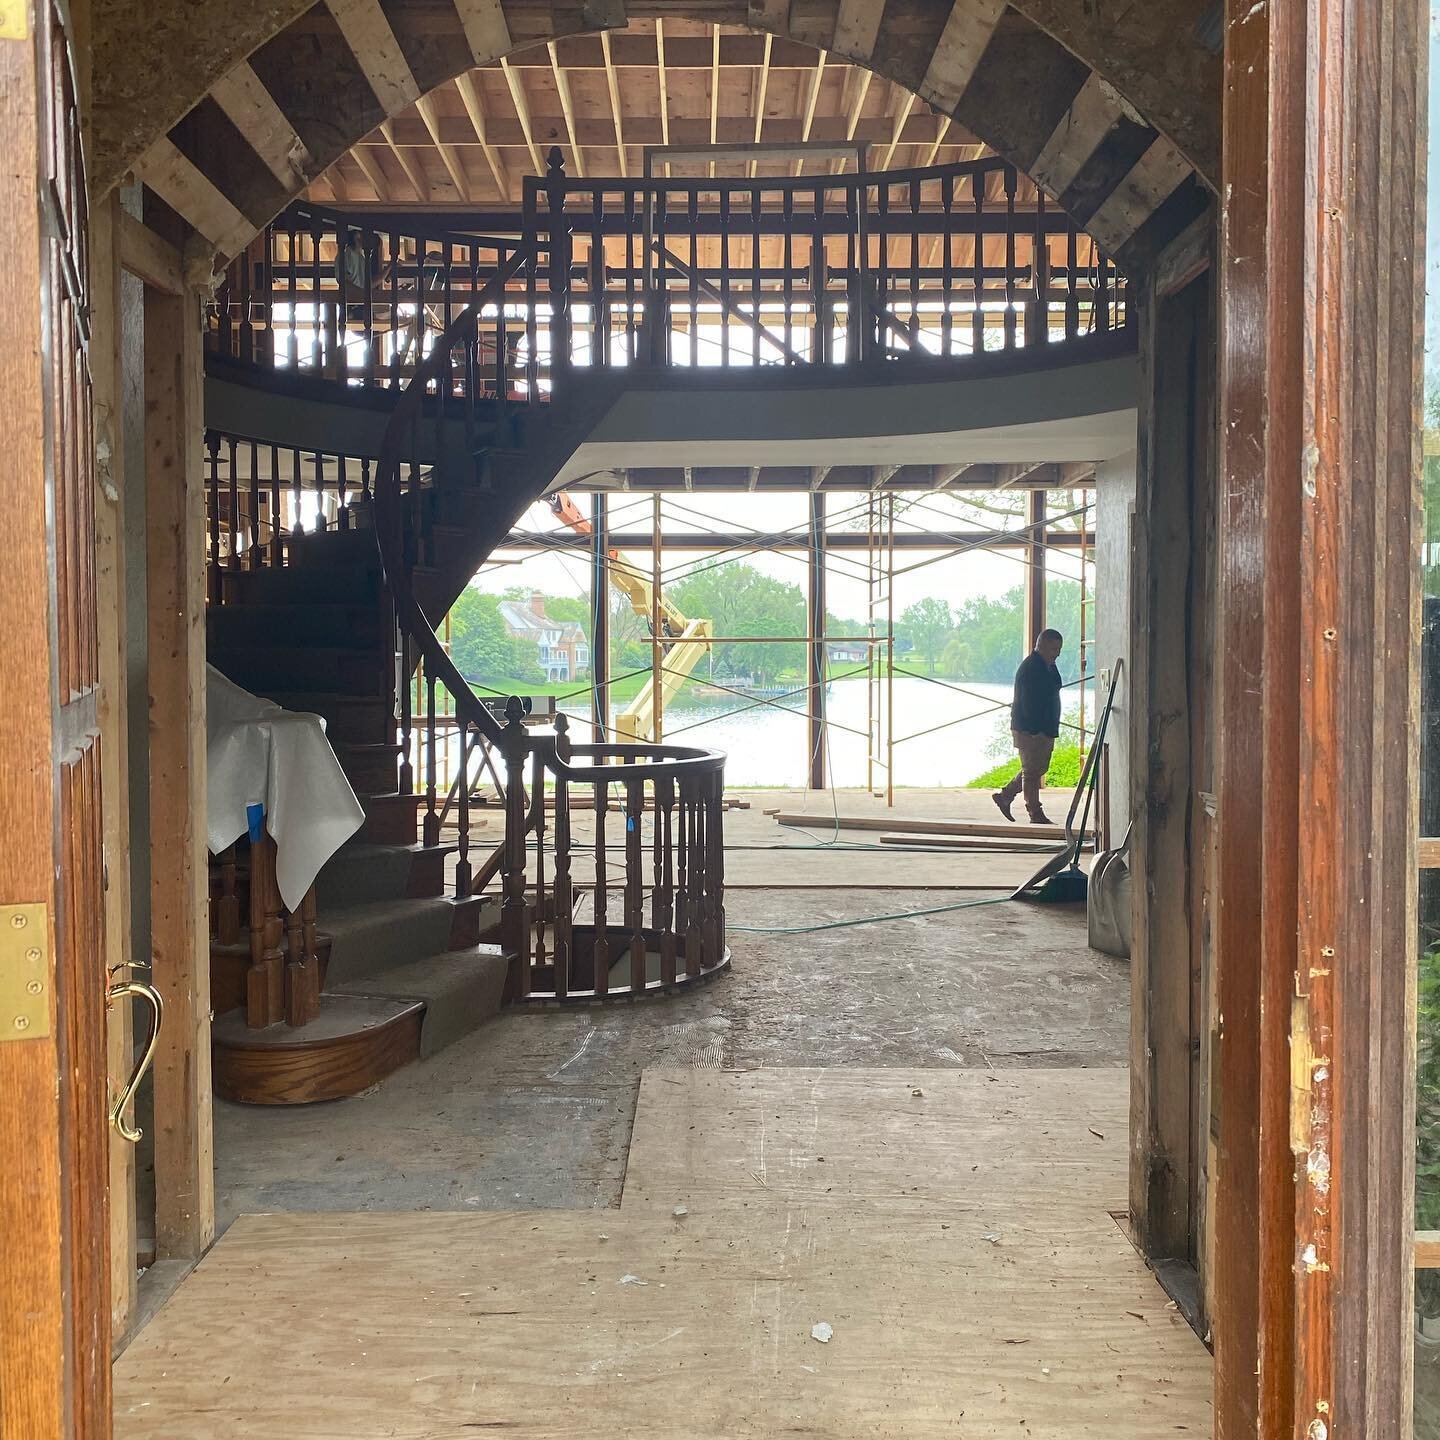 Breathing new life into a dated Tudor... the outside and inside will mingle with a 2 story glass curtain wall... #staytuned  #interiordesign #outsidein #englishtudor #rehabilitation #beauty #lovelovelove💕 #framing #underconstruction #cantwait #thisi